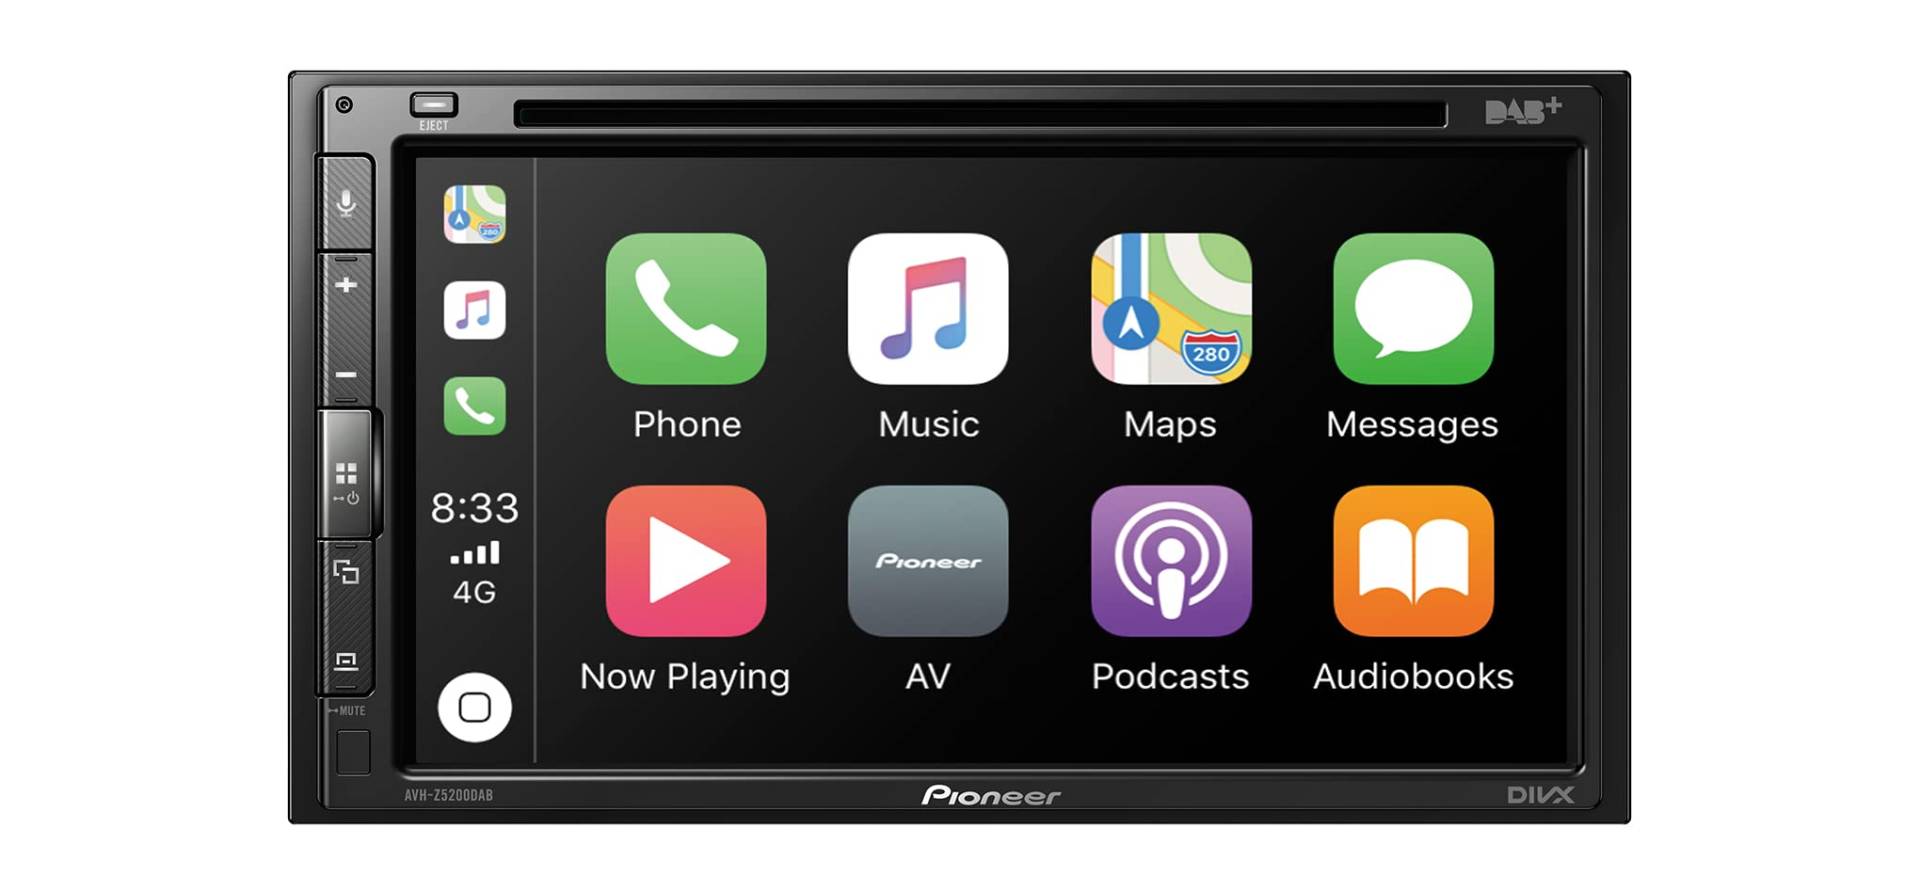 Pioneer AVH-Z5200DAB 2-DIN-Multimedia Player, 6,8-Zoll ClearType-Touchscreen, Smartphone-Anbindung, USB, Apple CarPlay, Android Auto, DAB/DAB+ Digitalradio, Bluetooth, 13-Band-Grafikequalizer von Pioneer